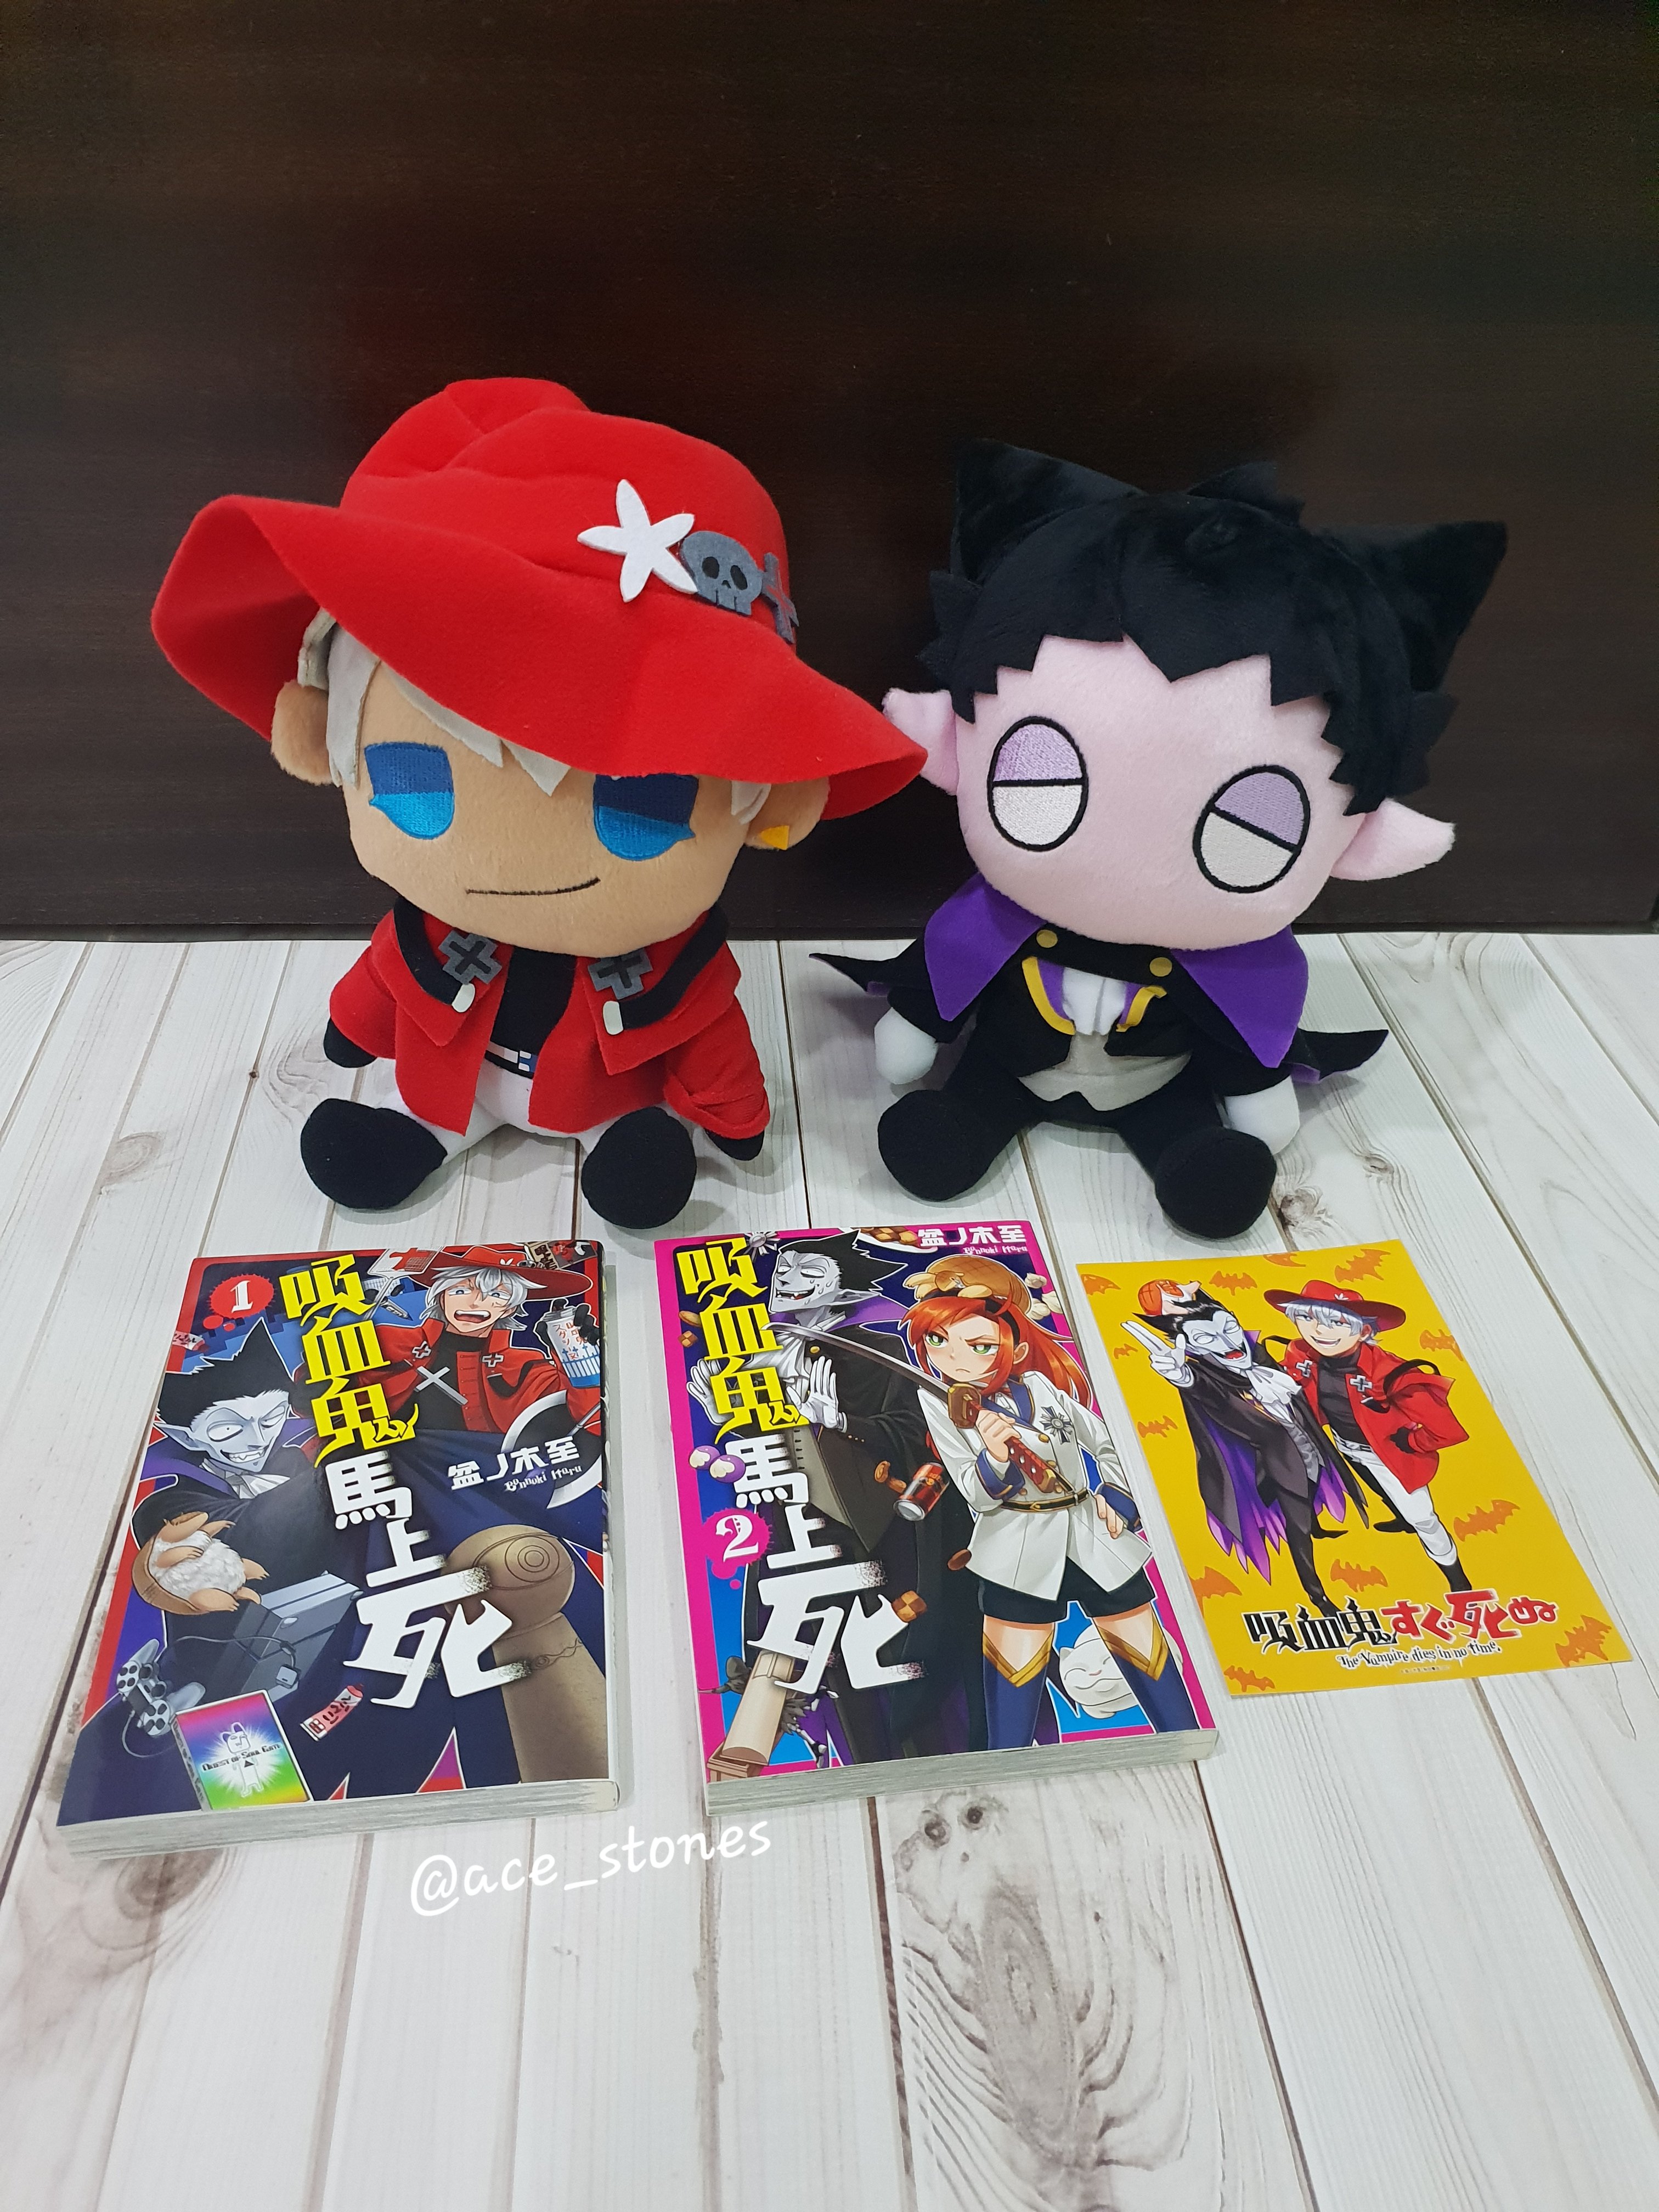 Ace S Looking Forward To Watching The The Vampire Dies In No Time Anime Sharing This Photo Of My 吸血鬼すぐ死ぬ Plushies Again Because They Just Look So Cute Really Glad